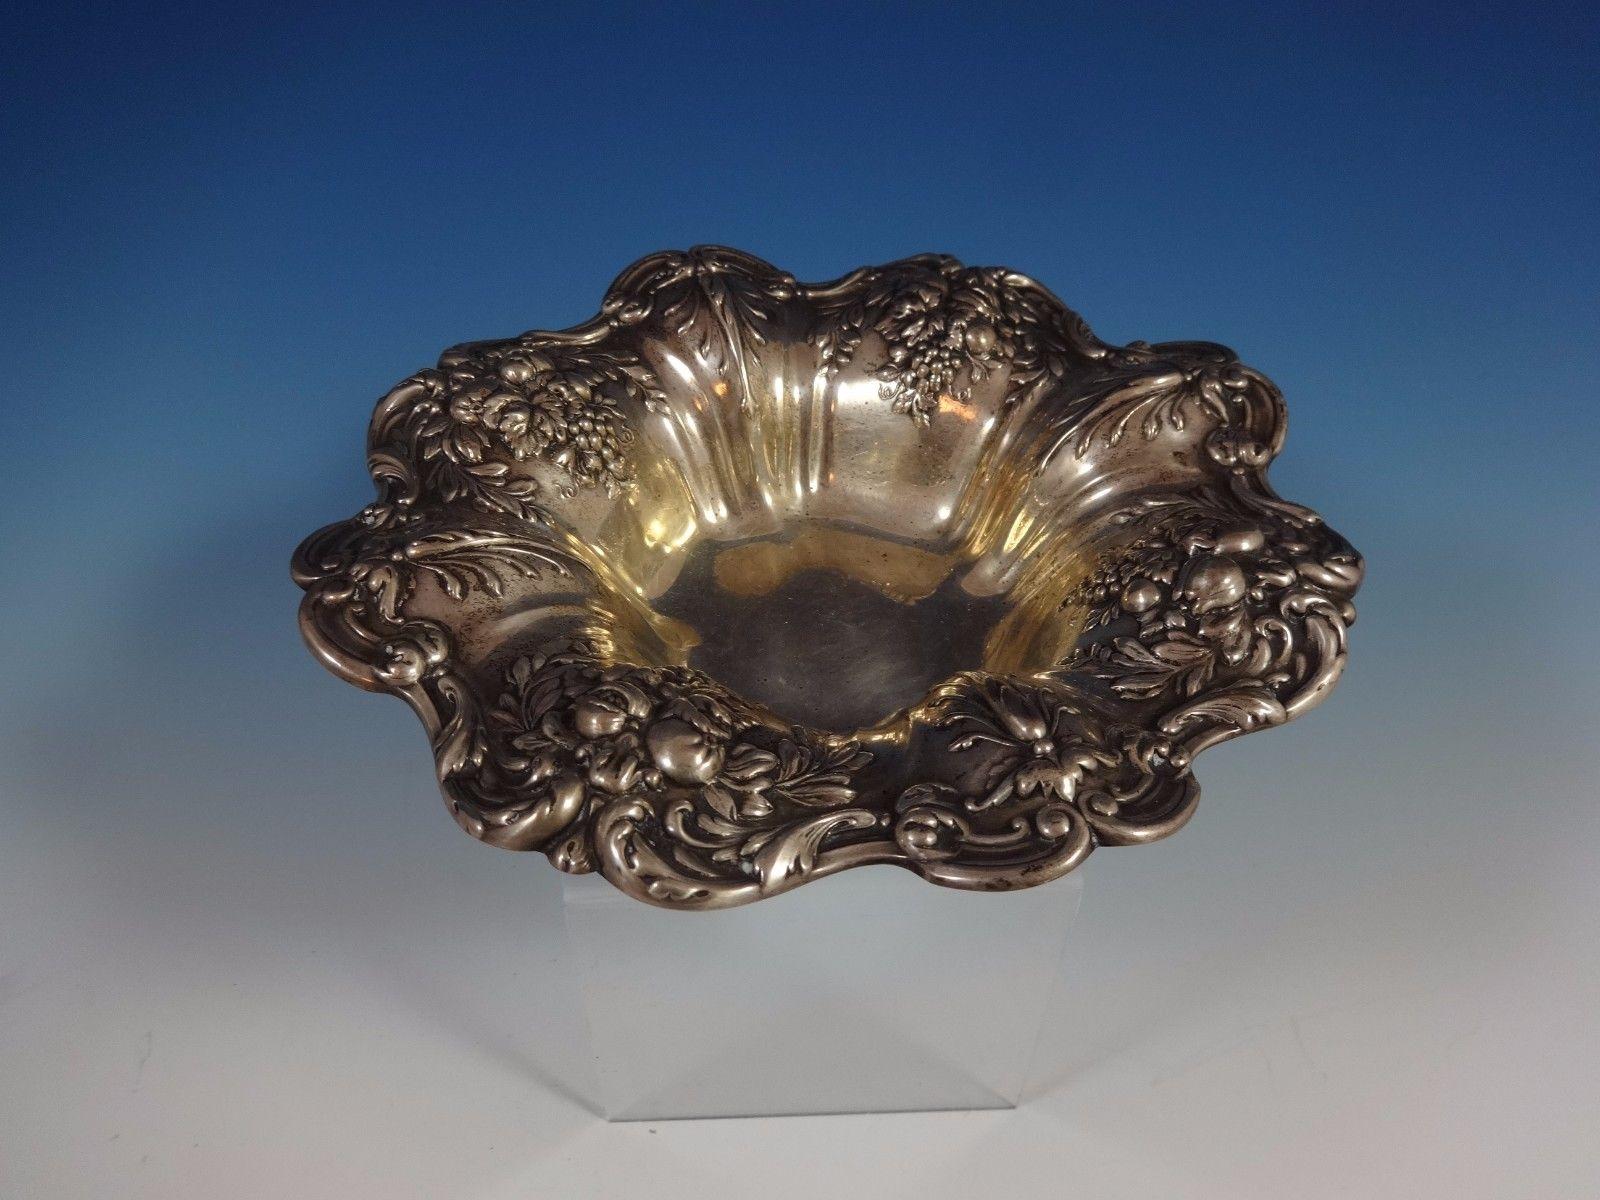 Francis I by Reed & Barton Old sterling silver candy dish with feet #X569F

Francis I by Reed & Barton

Beautiful Francis I by Reed & Barton sterling silver candy dish with feet. This item is marked #X569F and weighs 10.48 troy ounces. It